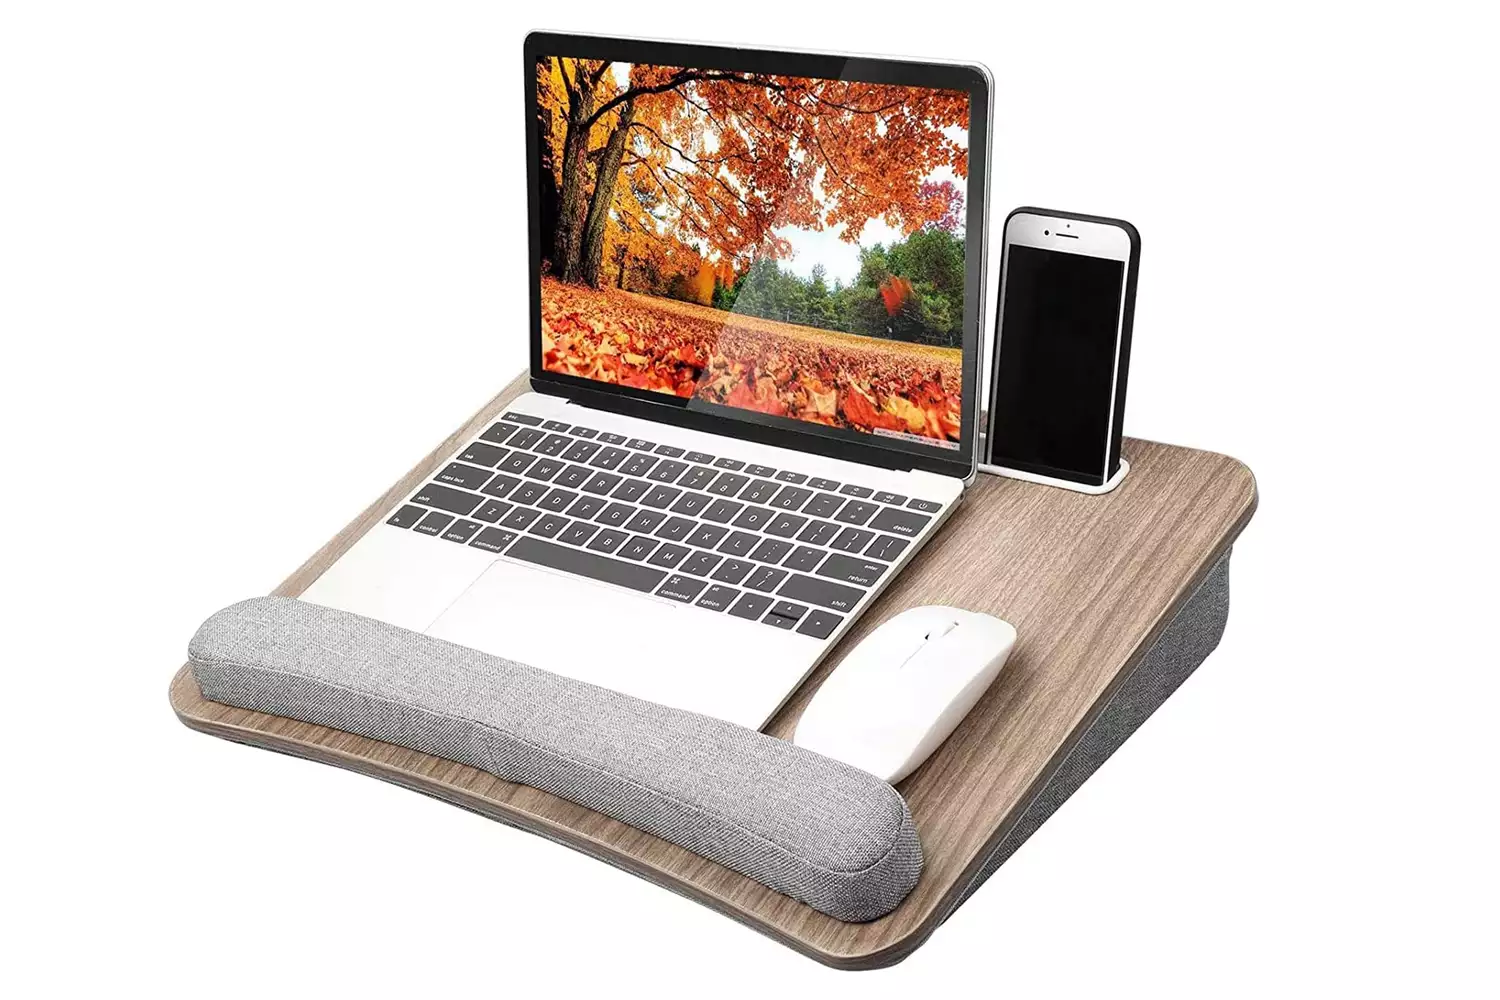 Huanuo Lap Desk With Support Cushion